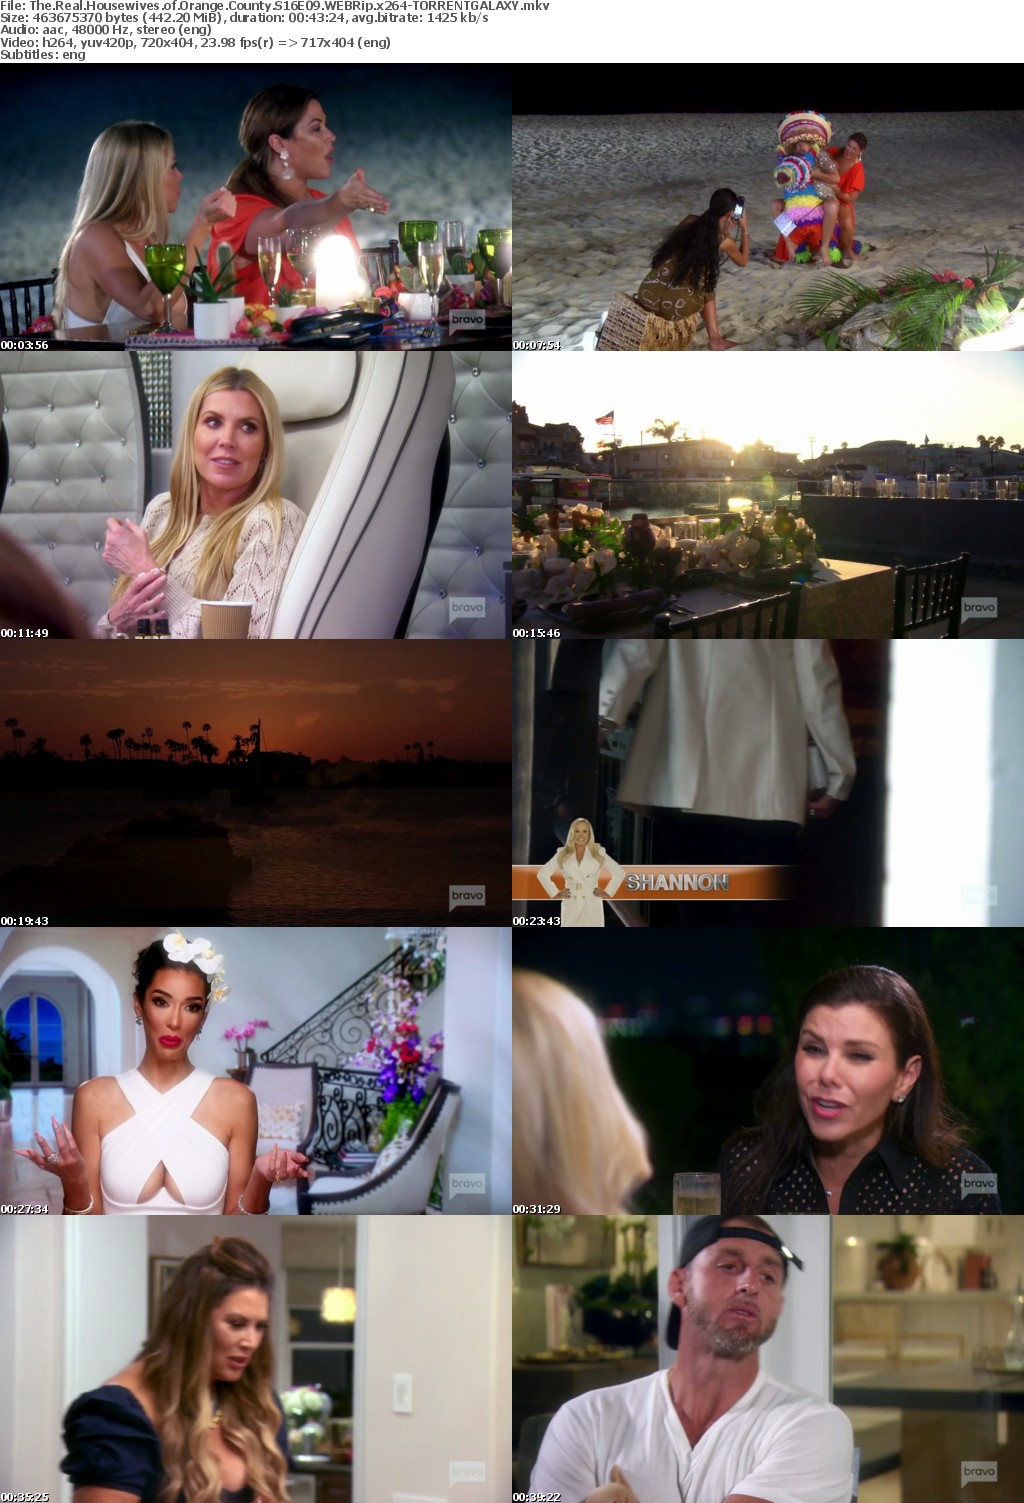 The Real Housewives of Orange County S16E09 WEBRip x264-GALAXY